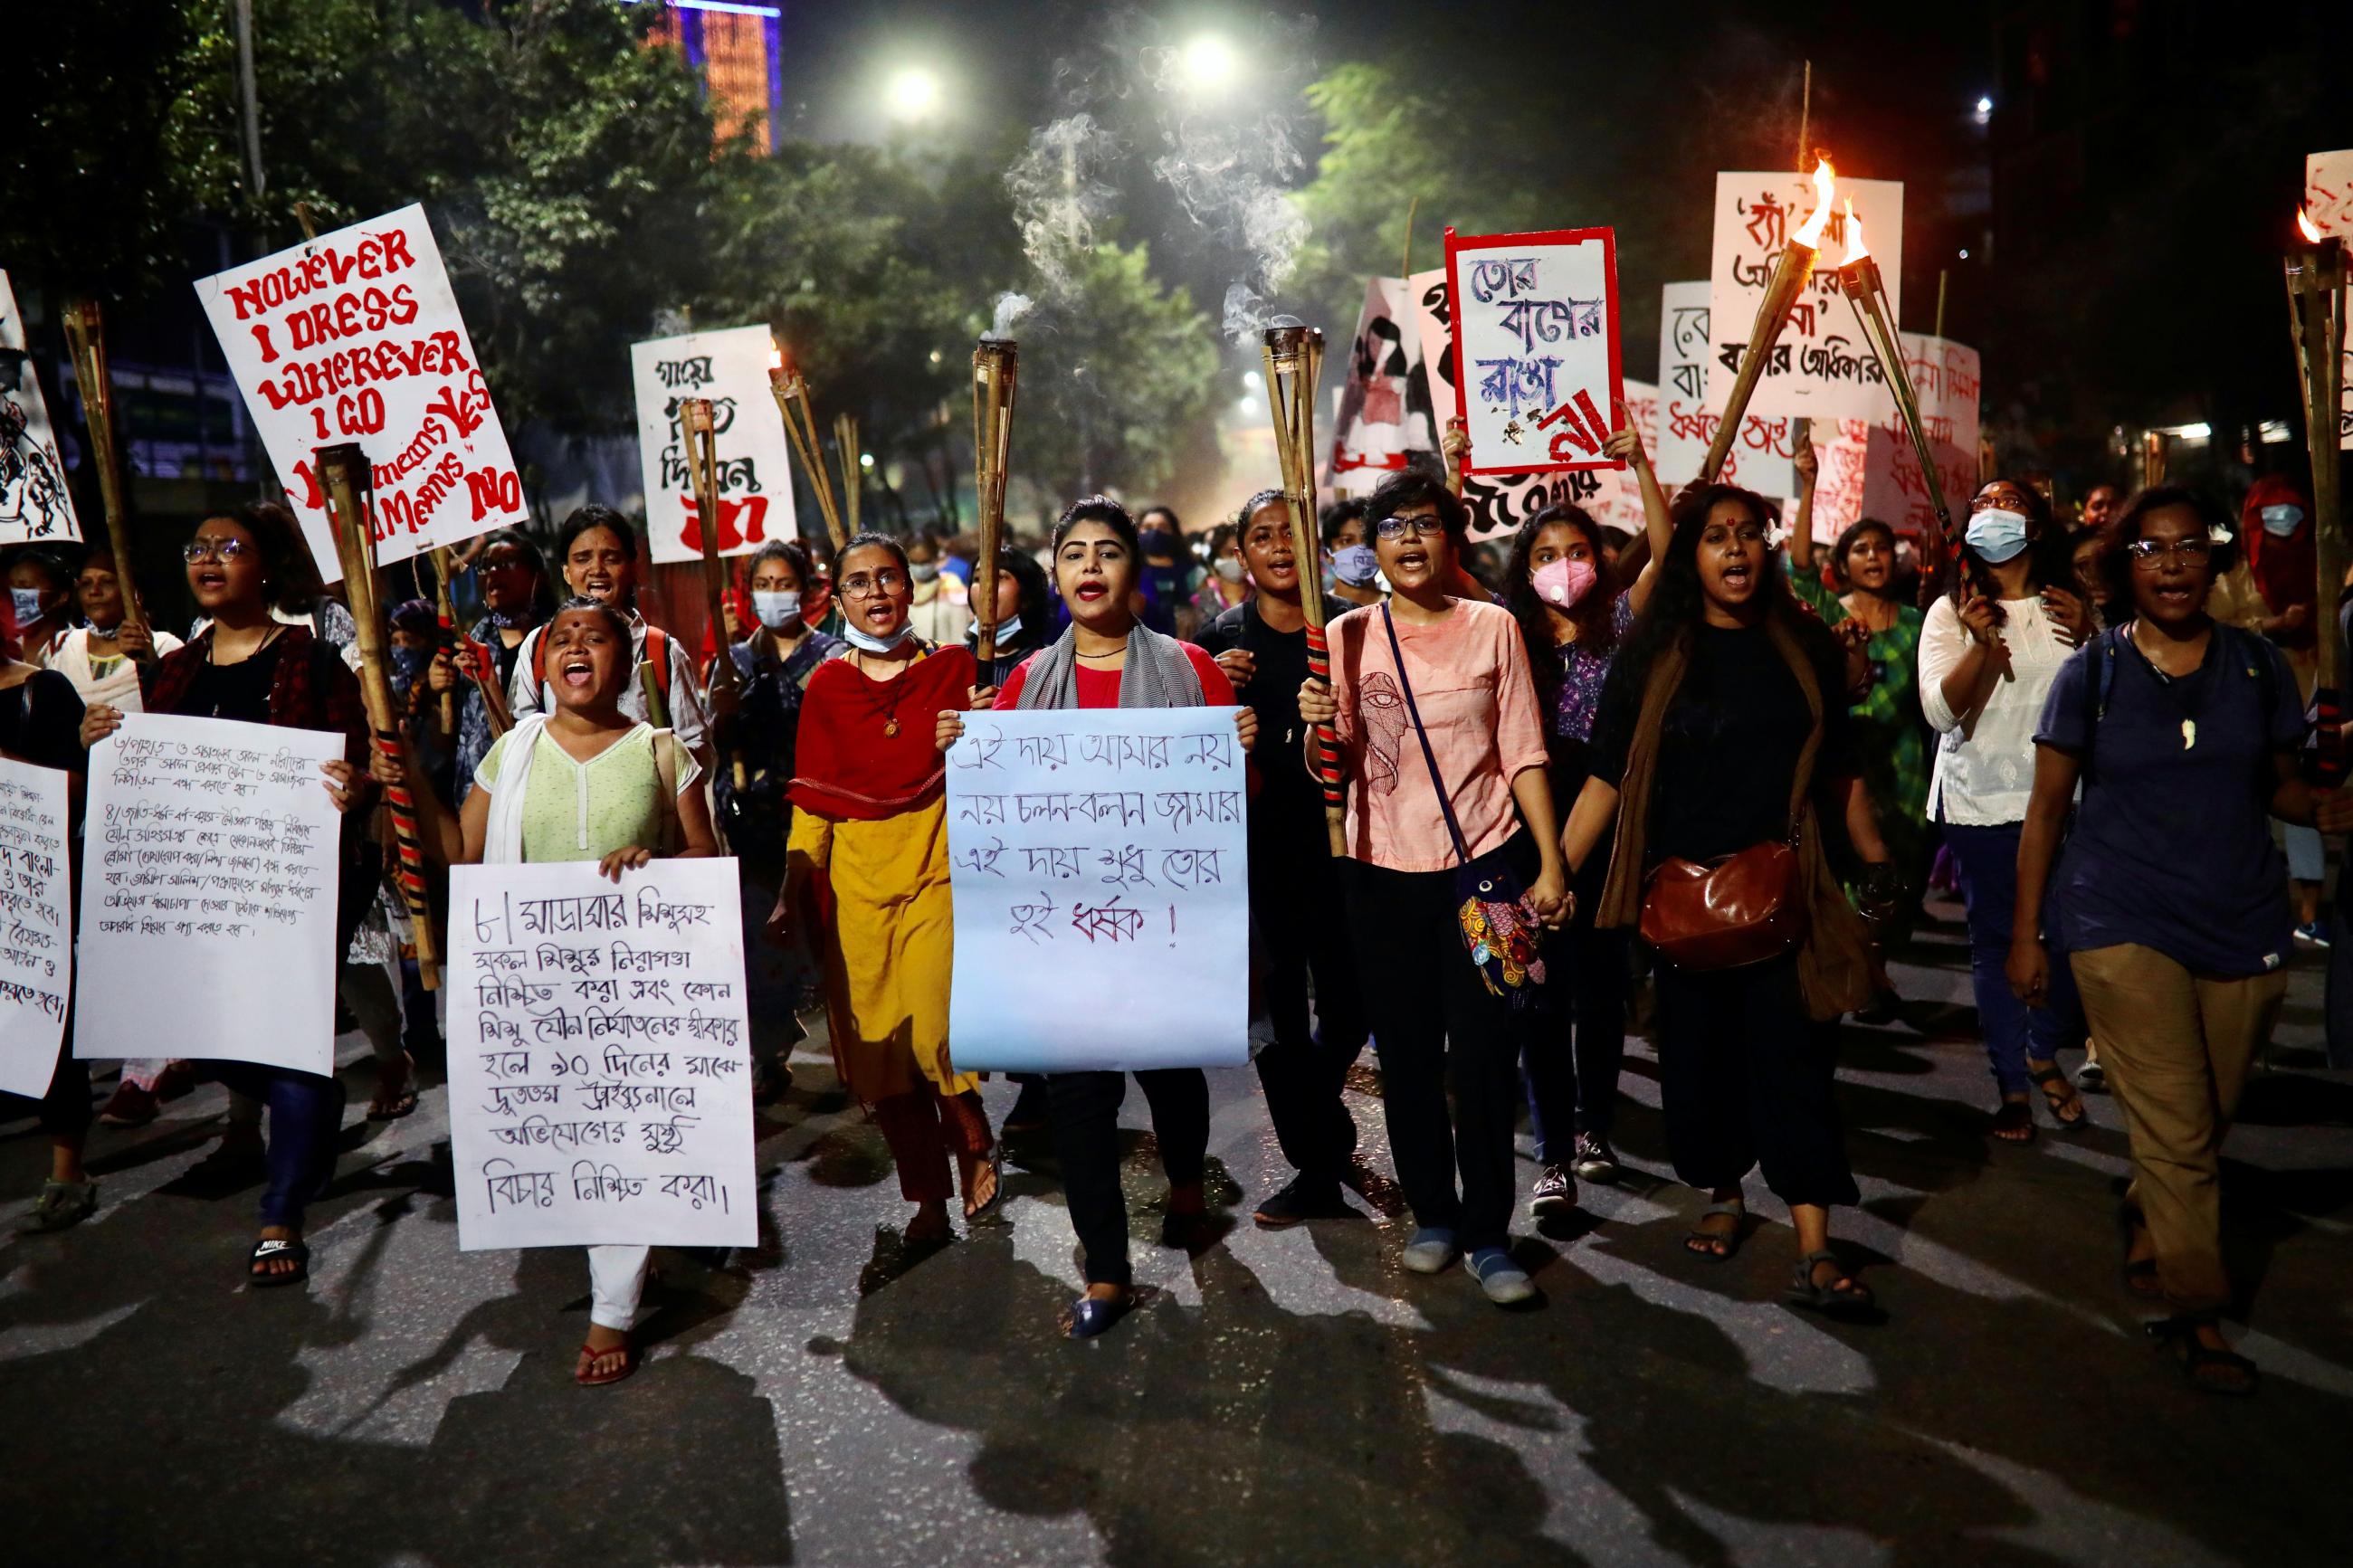 Female activists and students take part in a torch procession demanding women's safety and justice for rape victims amid the coronavirus disease (COVID-19) outbreak in Dhaka, Bangladesh on October 14, 2020. REUTERS/Mohammad Ponir Hossain